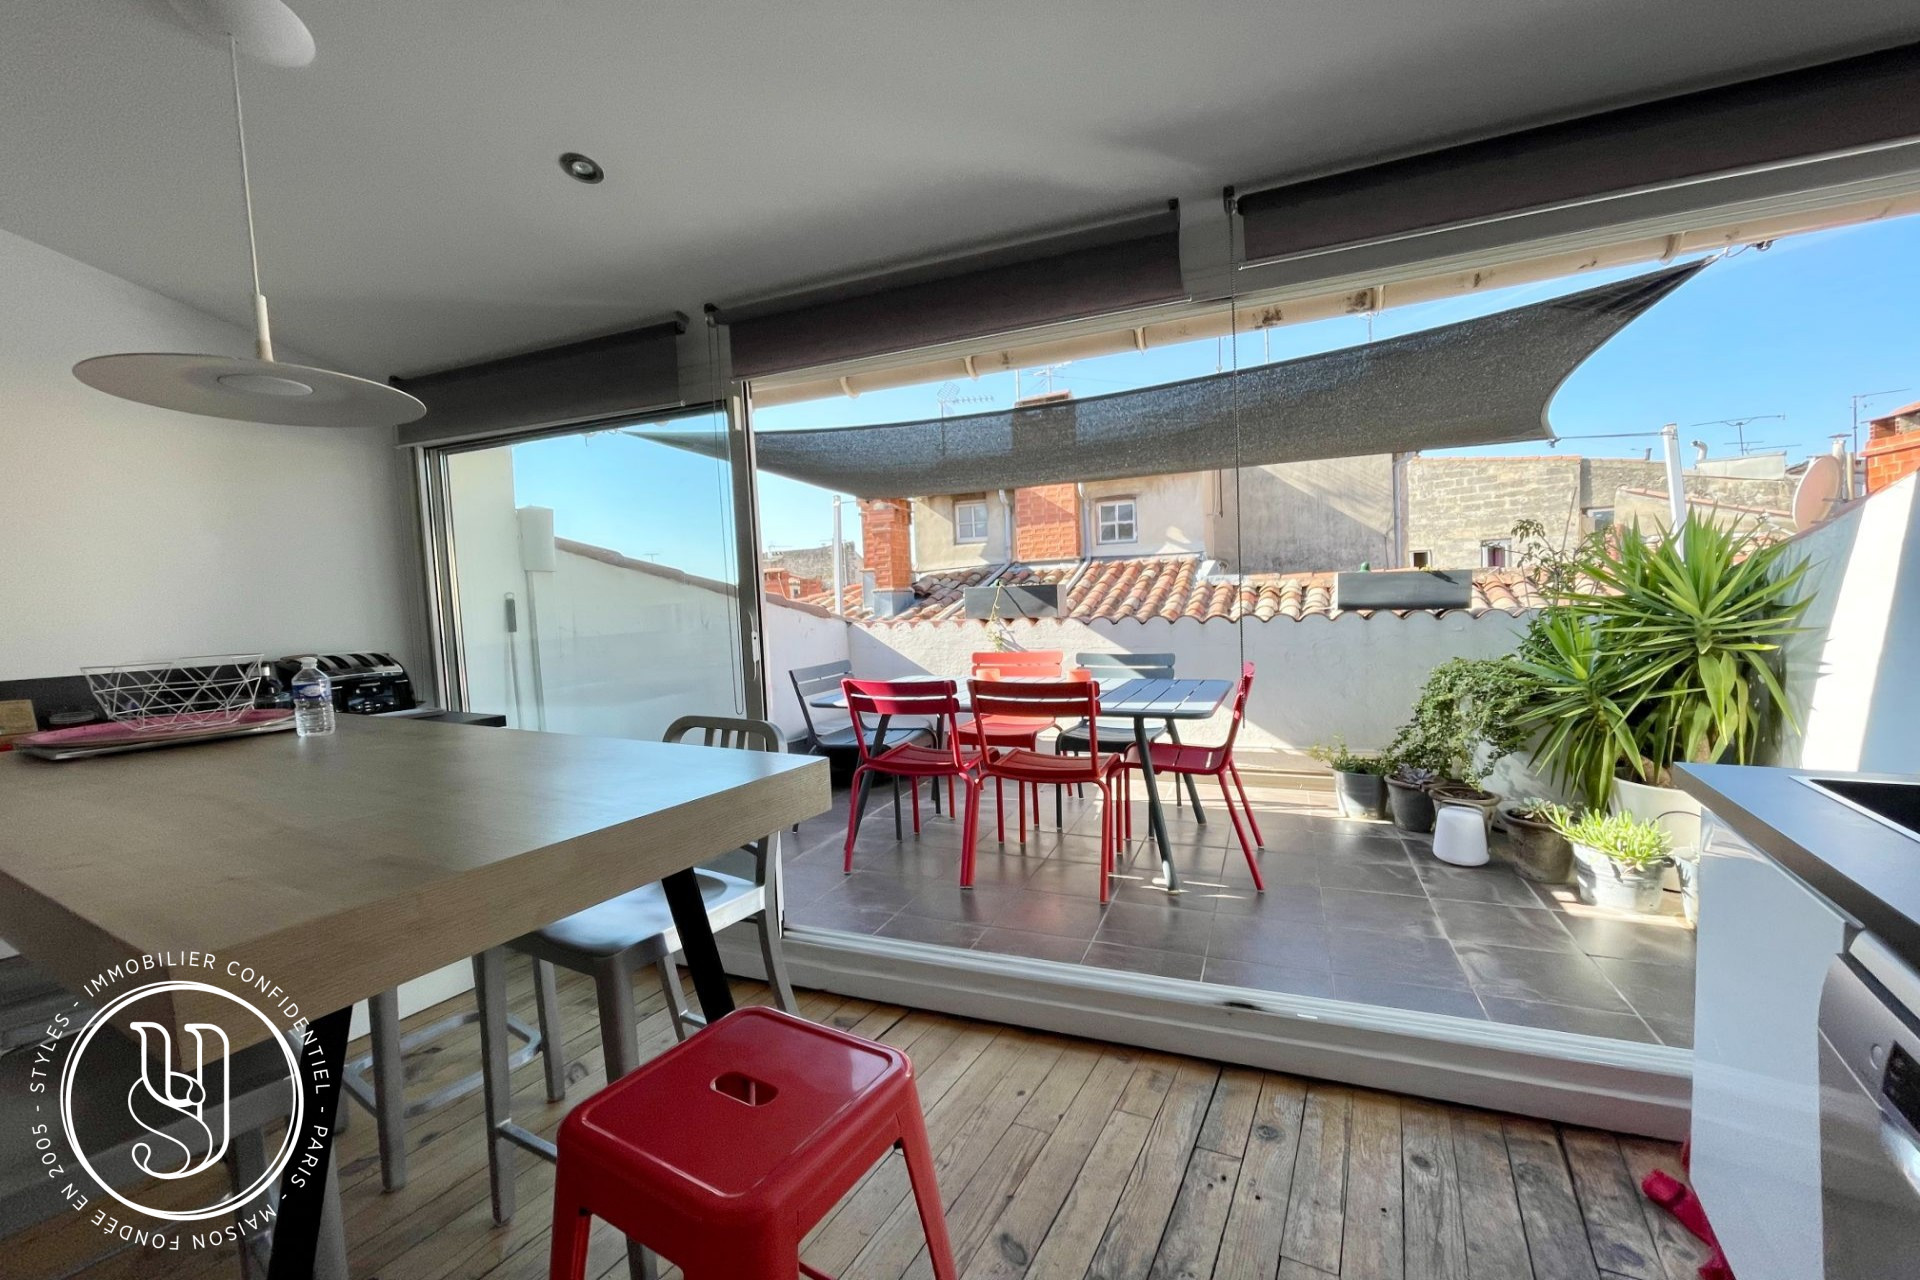 Montpellier - Sold by S T Y L E S, Ecusson, a flat with terraces... - image 9